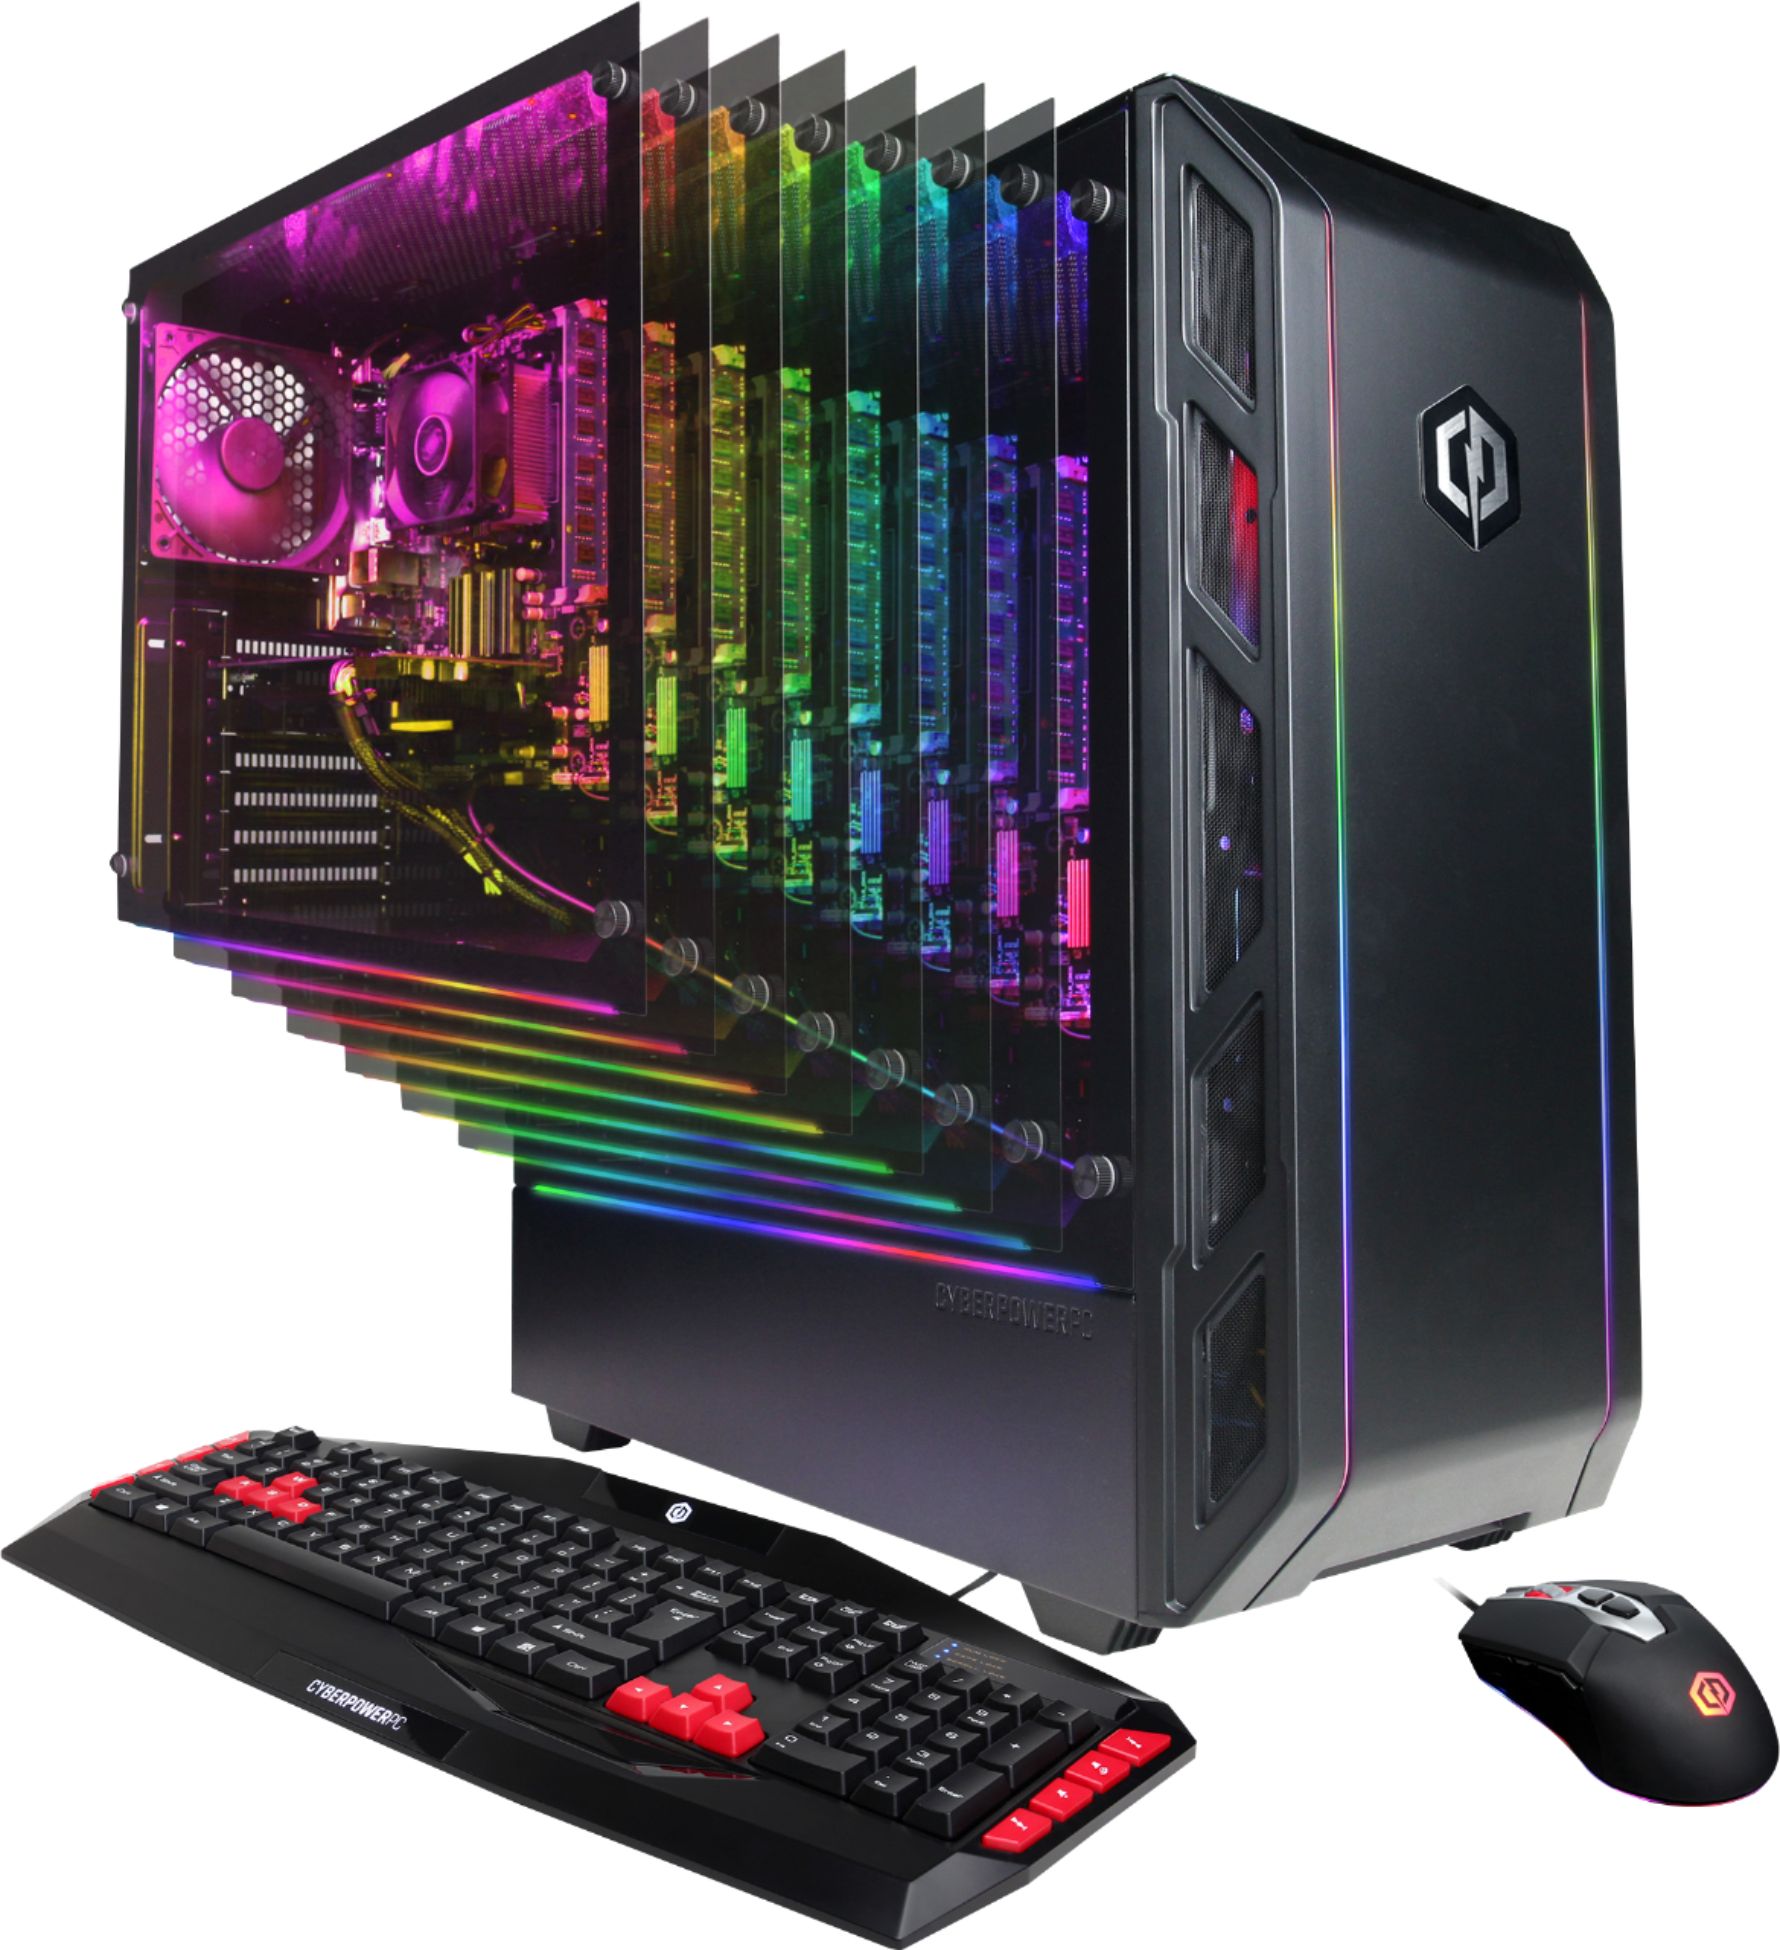 Questions and Answers: CyberPowerPC Gaming Desktop AMD FX 6300 8GB ...